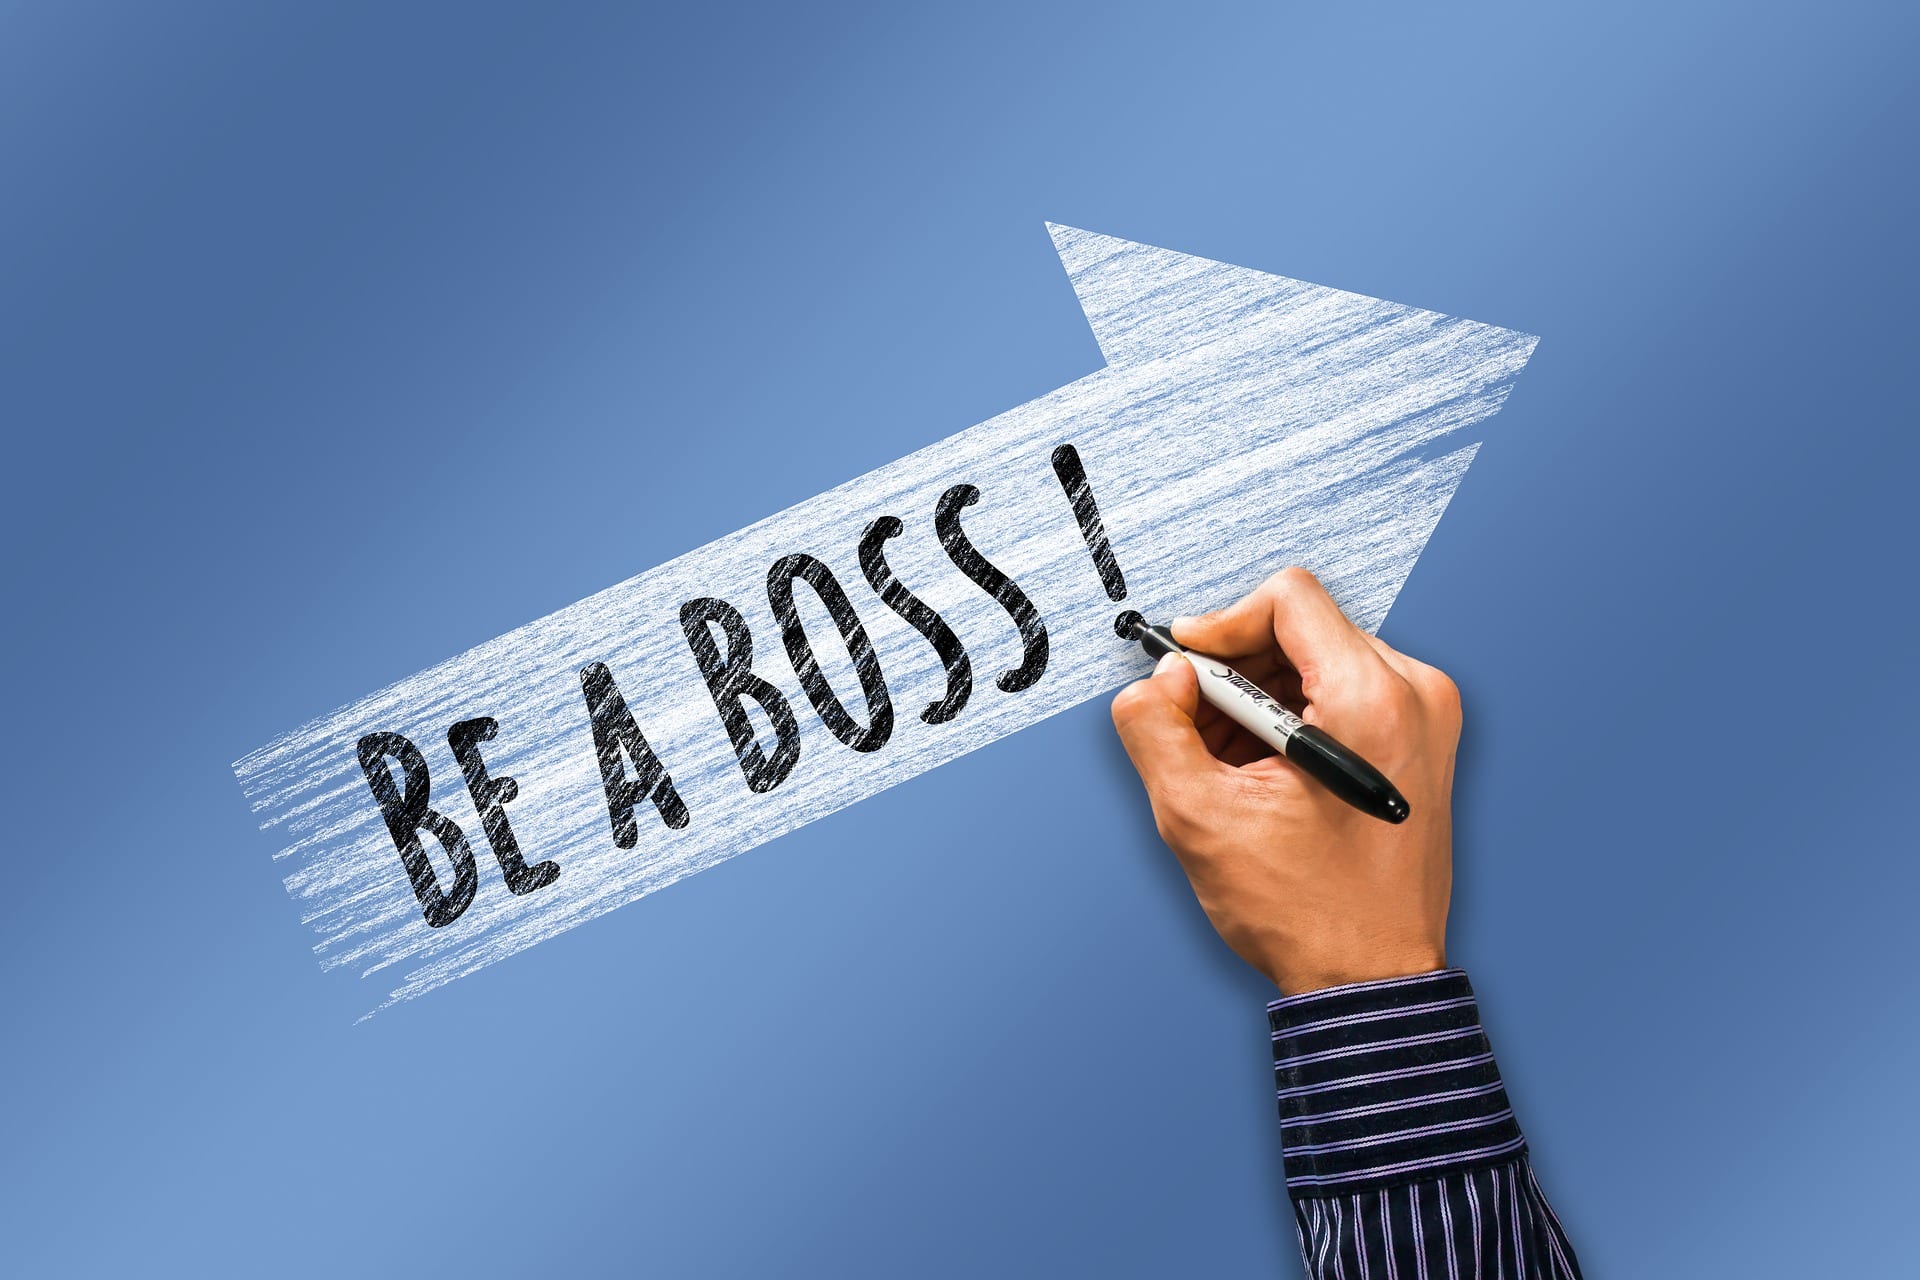 What Are The Characteristics Of A Good Boss?